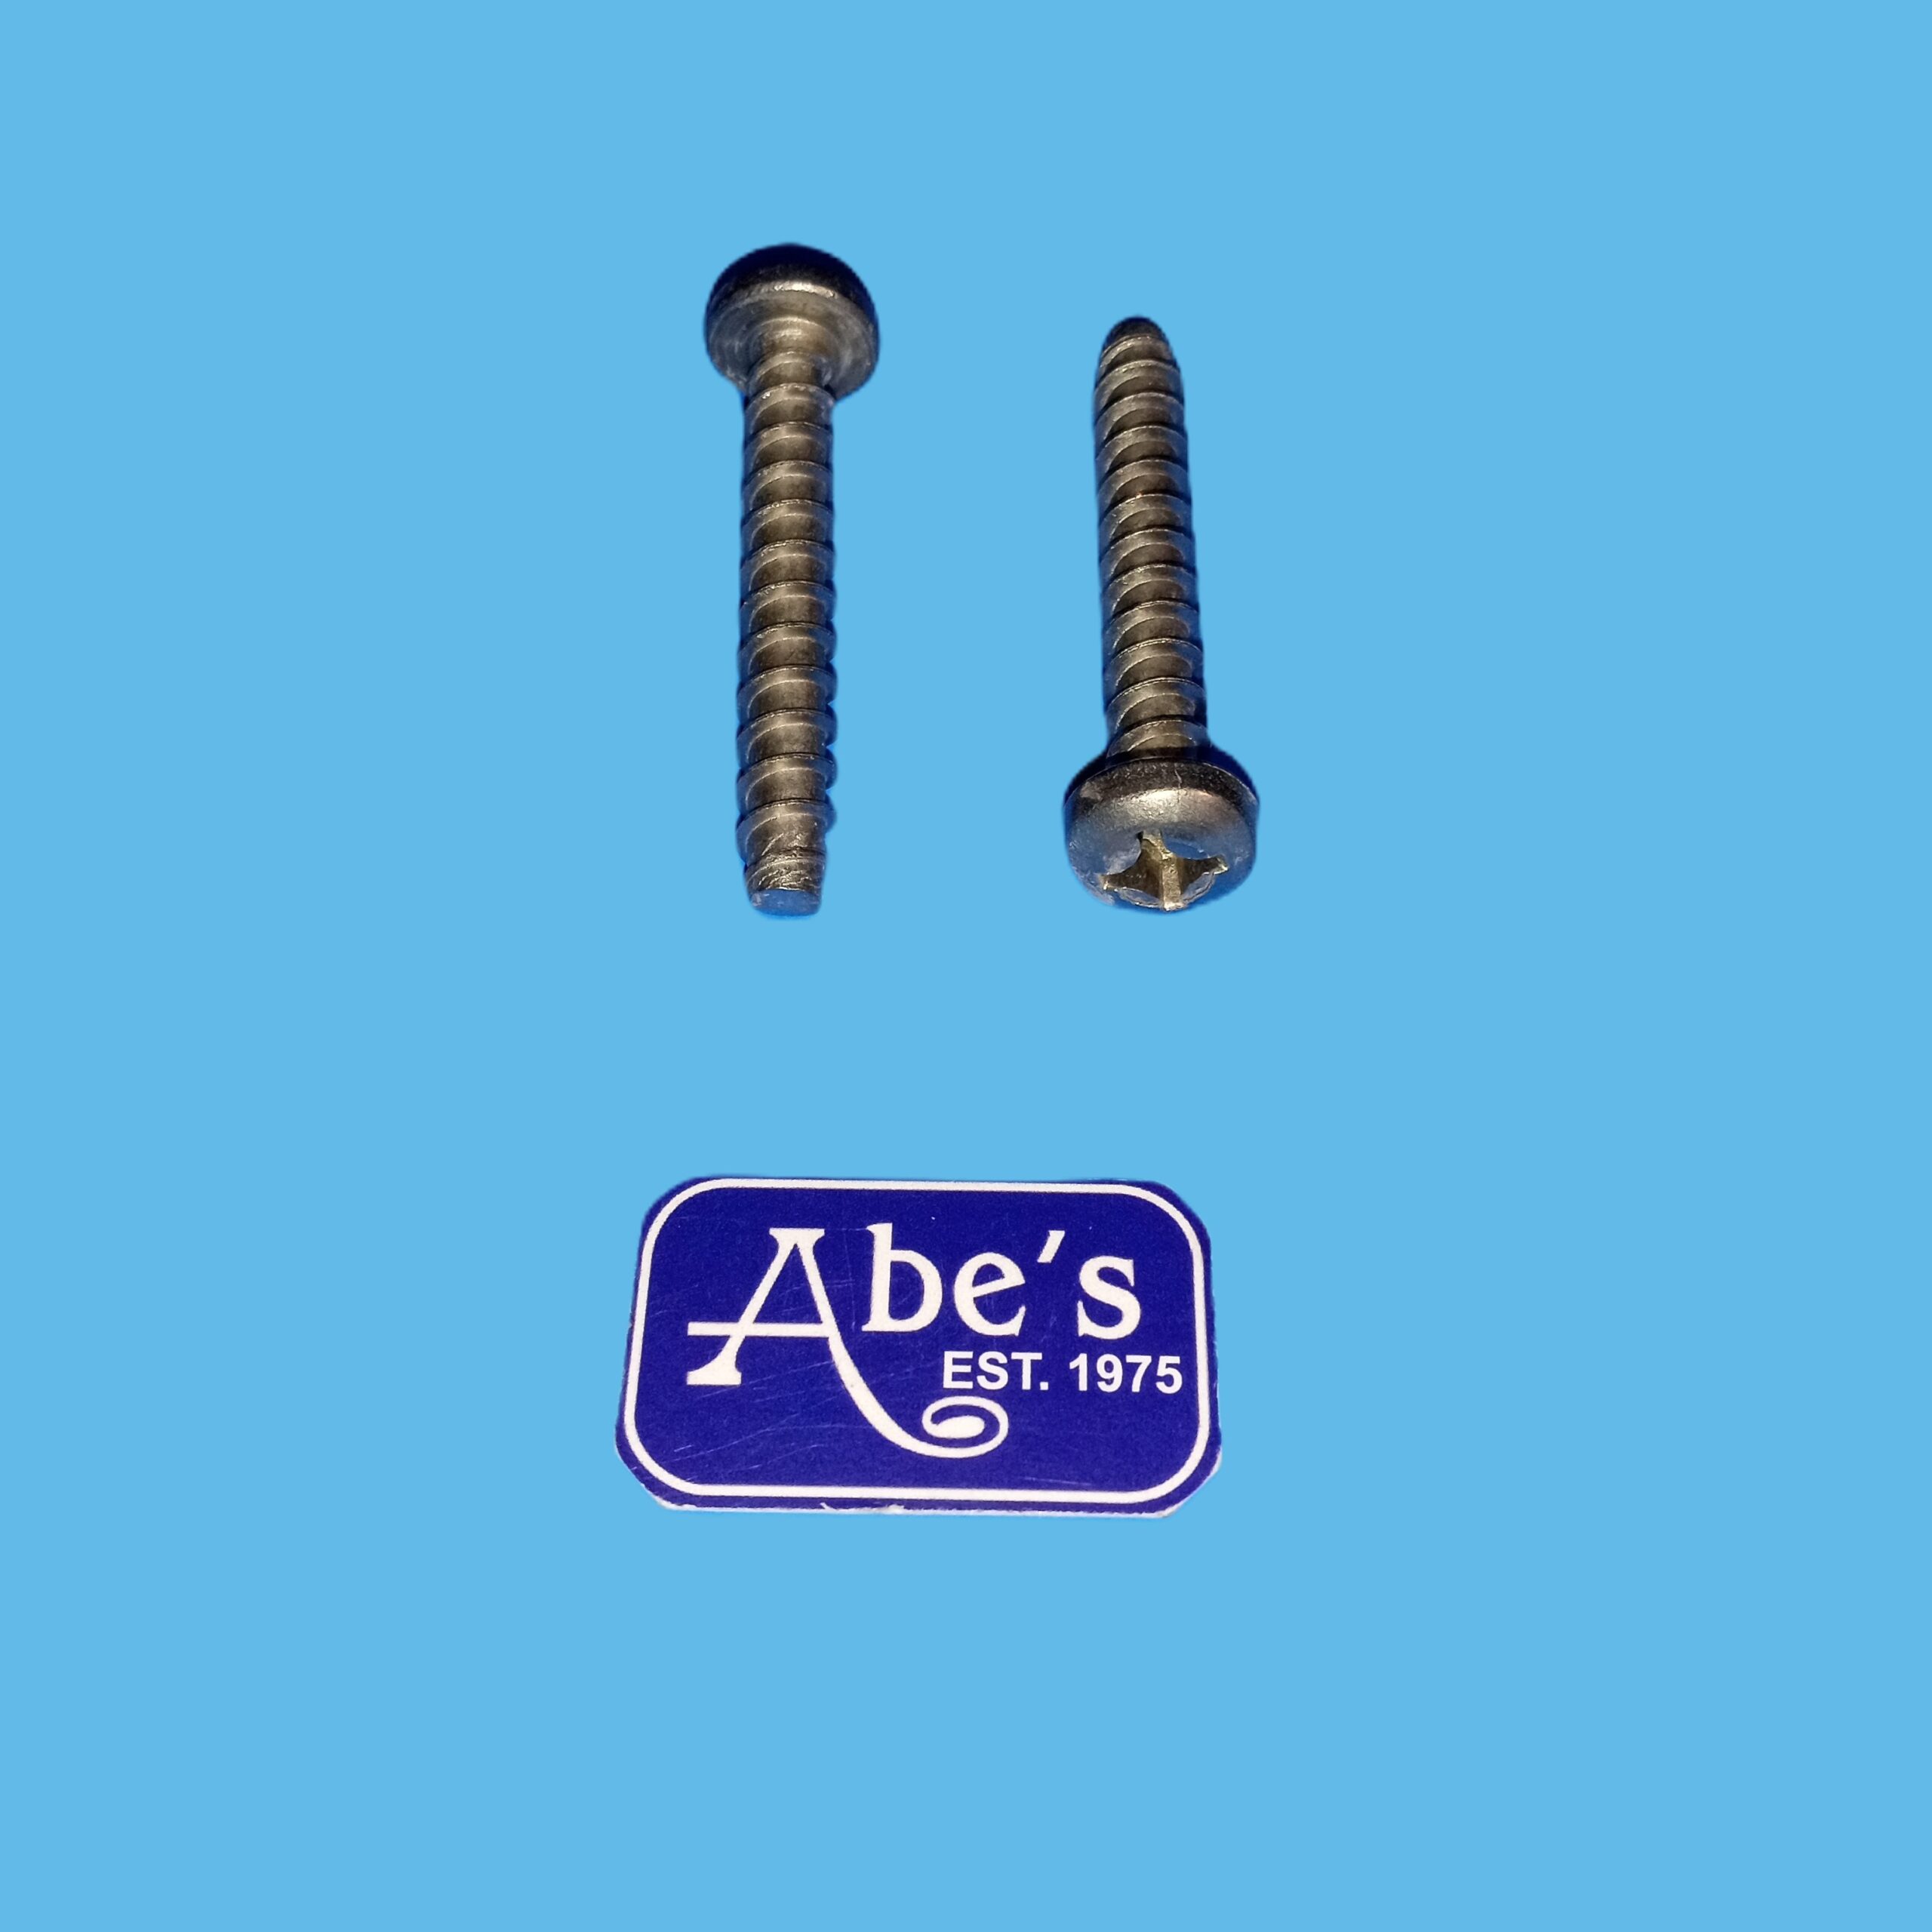 Hayward Screw Replacement for Plastic Sump / WGX1030Z2A / Affordable $ 4.75 / Hard to Find Deck accessories? Find Hard to Find Parts at Abe's Pools & Spas